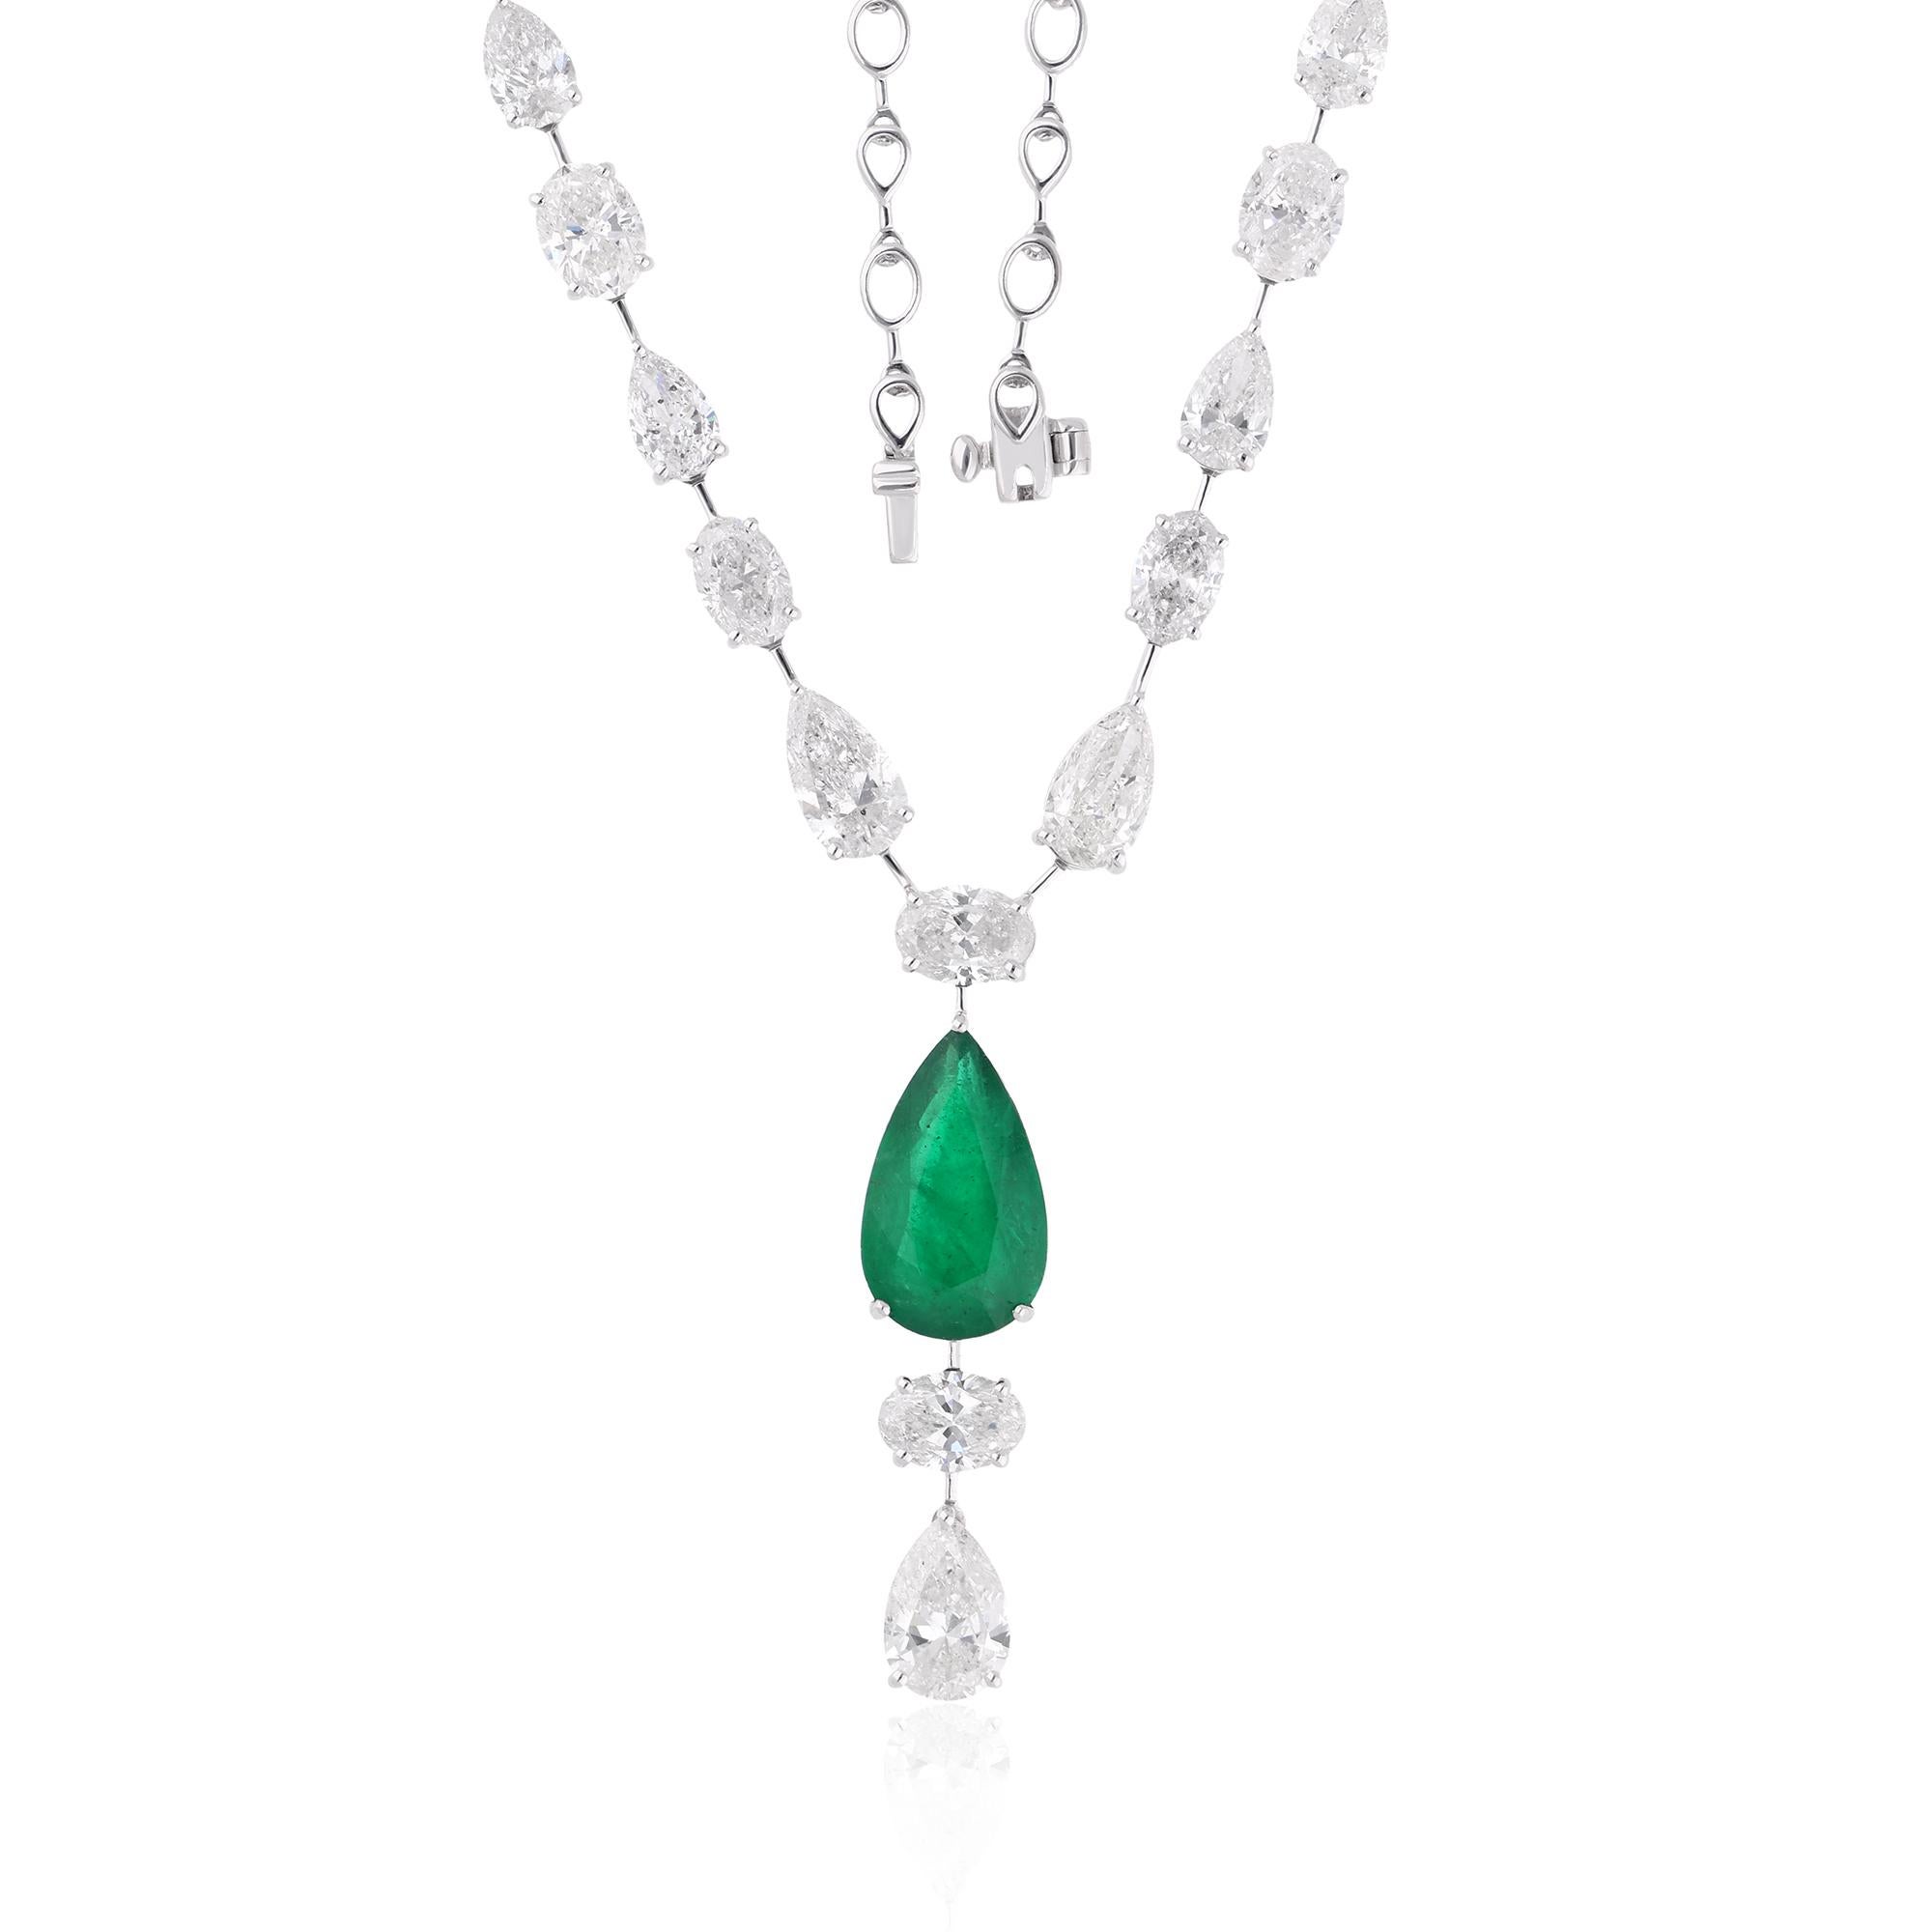 Introducing our enchanting Pear Zambian Emerald Gemstone Charm Necklace, a breathtaking piece of jewelry meticulously crafted in radiant 18 Karat White Gold. This exquisite necklace captures the essence of natural beauty and sophistication,